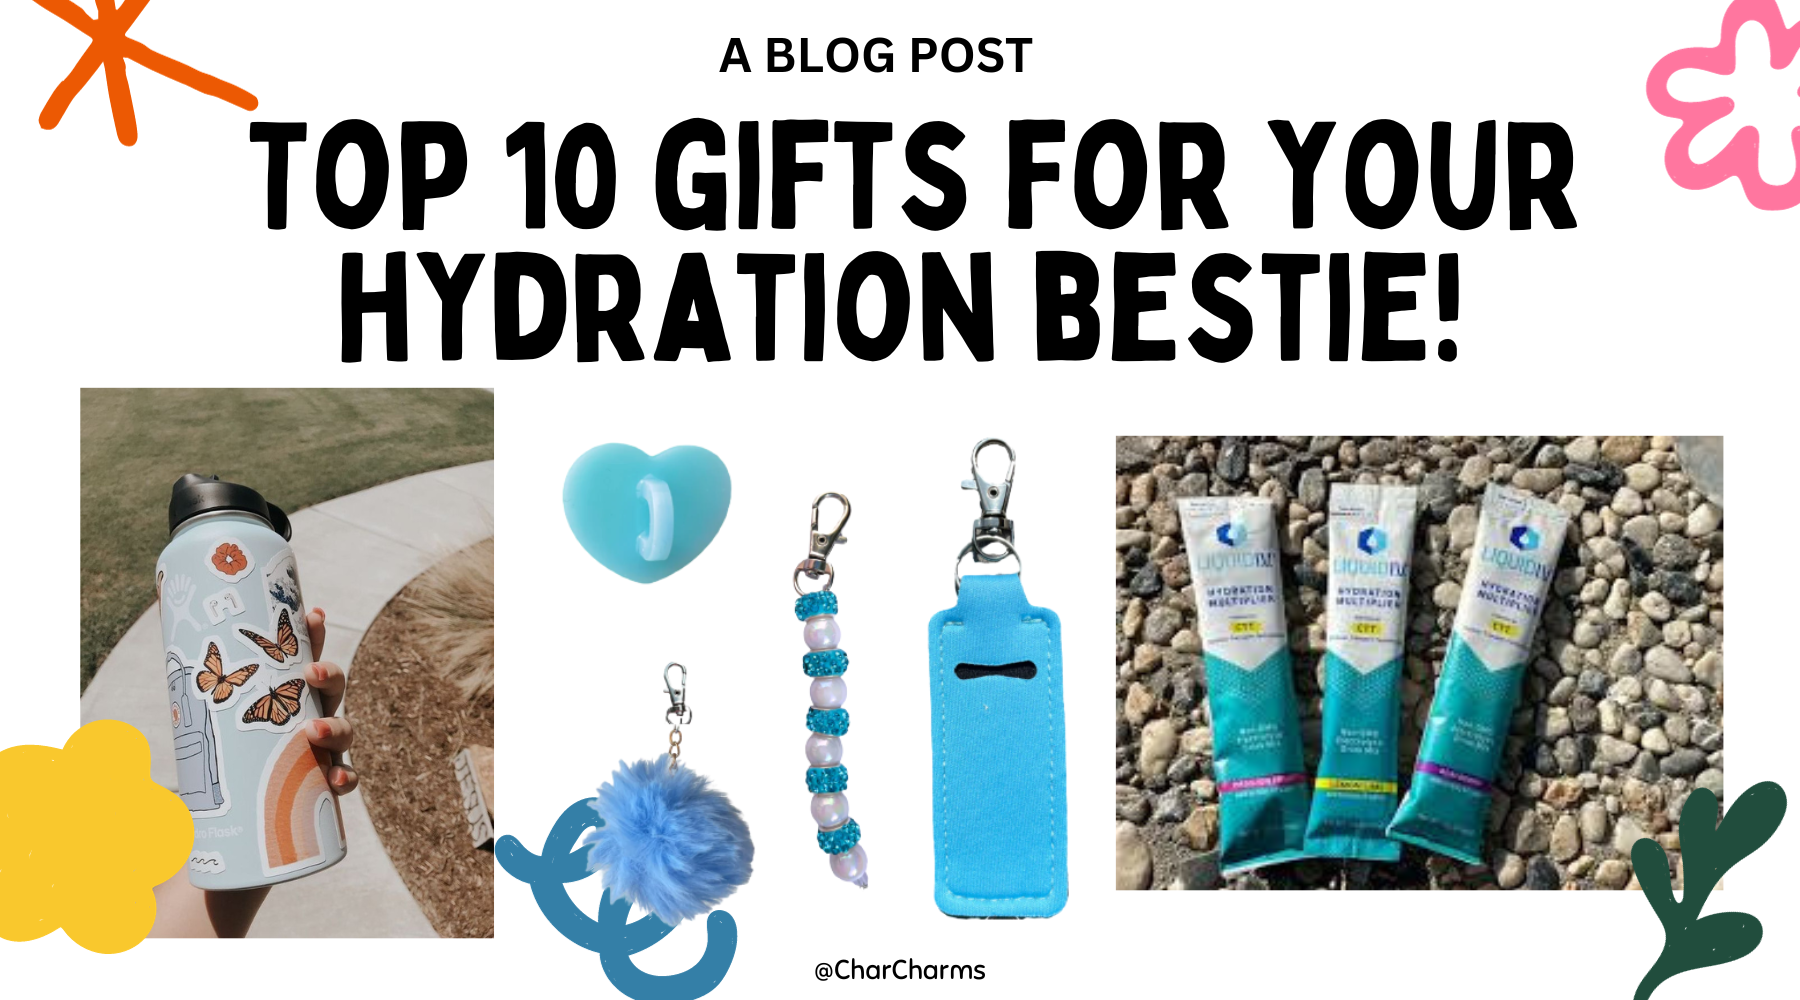 Top 10 Gifts For Your Hydration Girly Bestie!